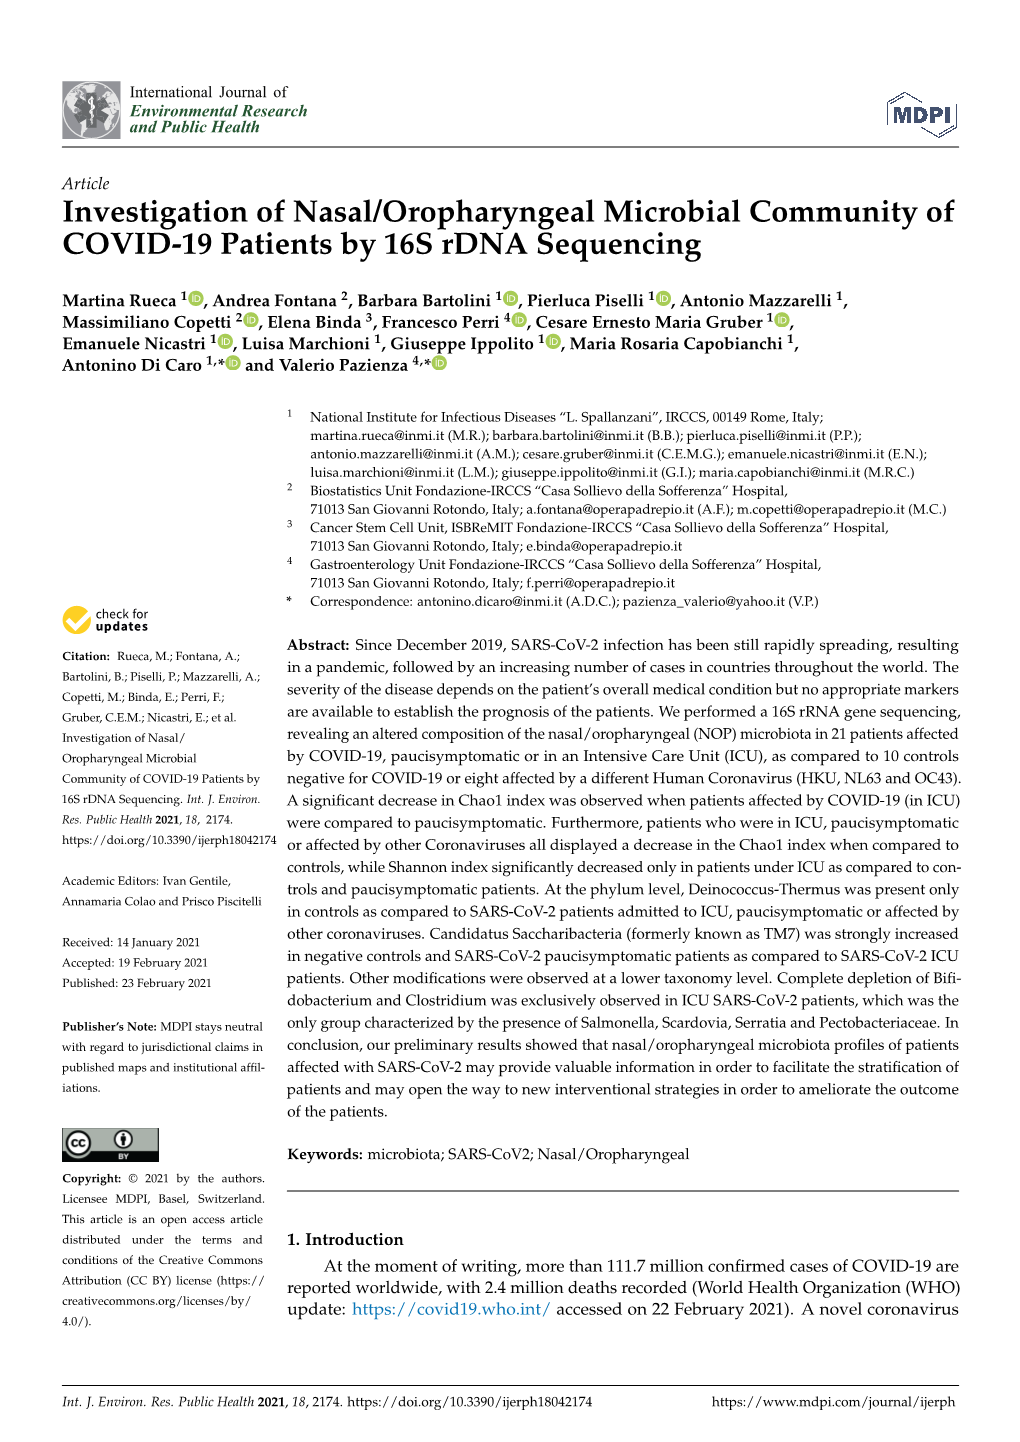 Investigation of Nasal/Oropharyngeal Microbial Community of COVID-19 Patients by 16S Rdna Sequencing